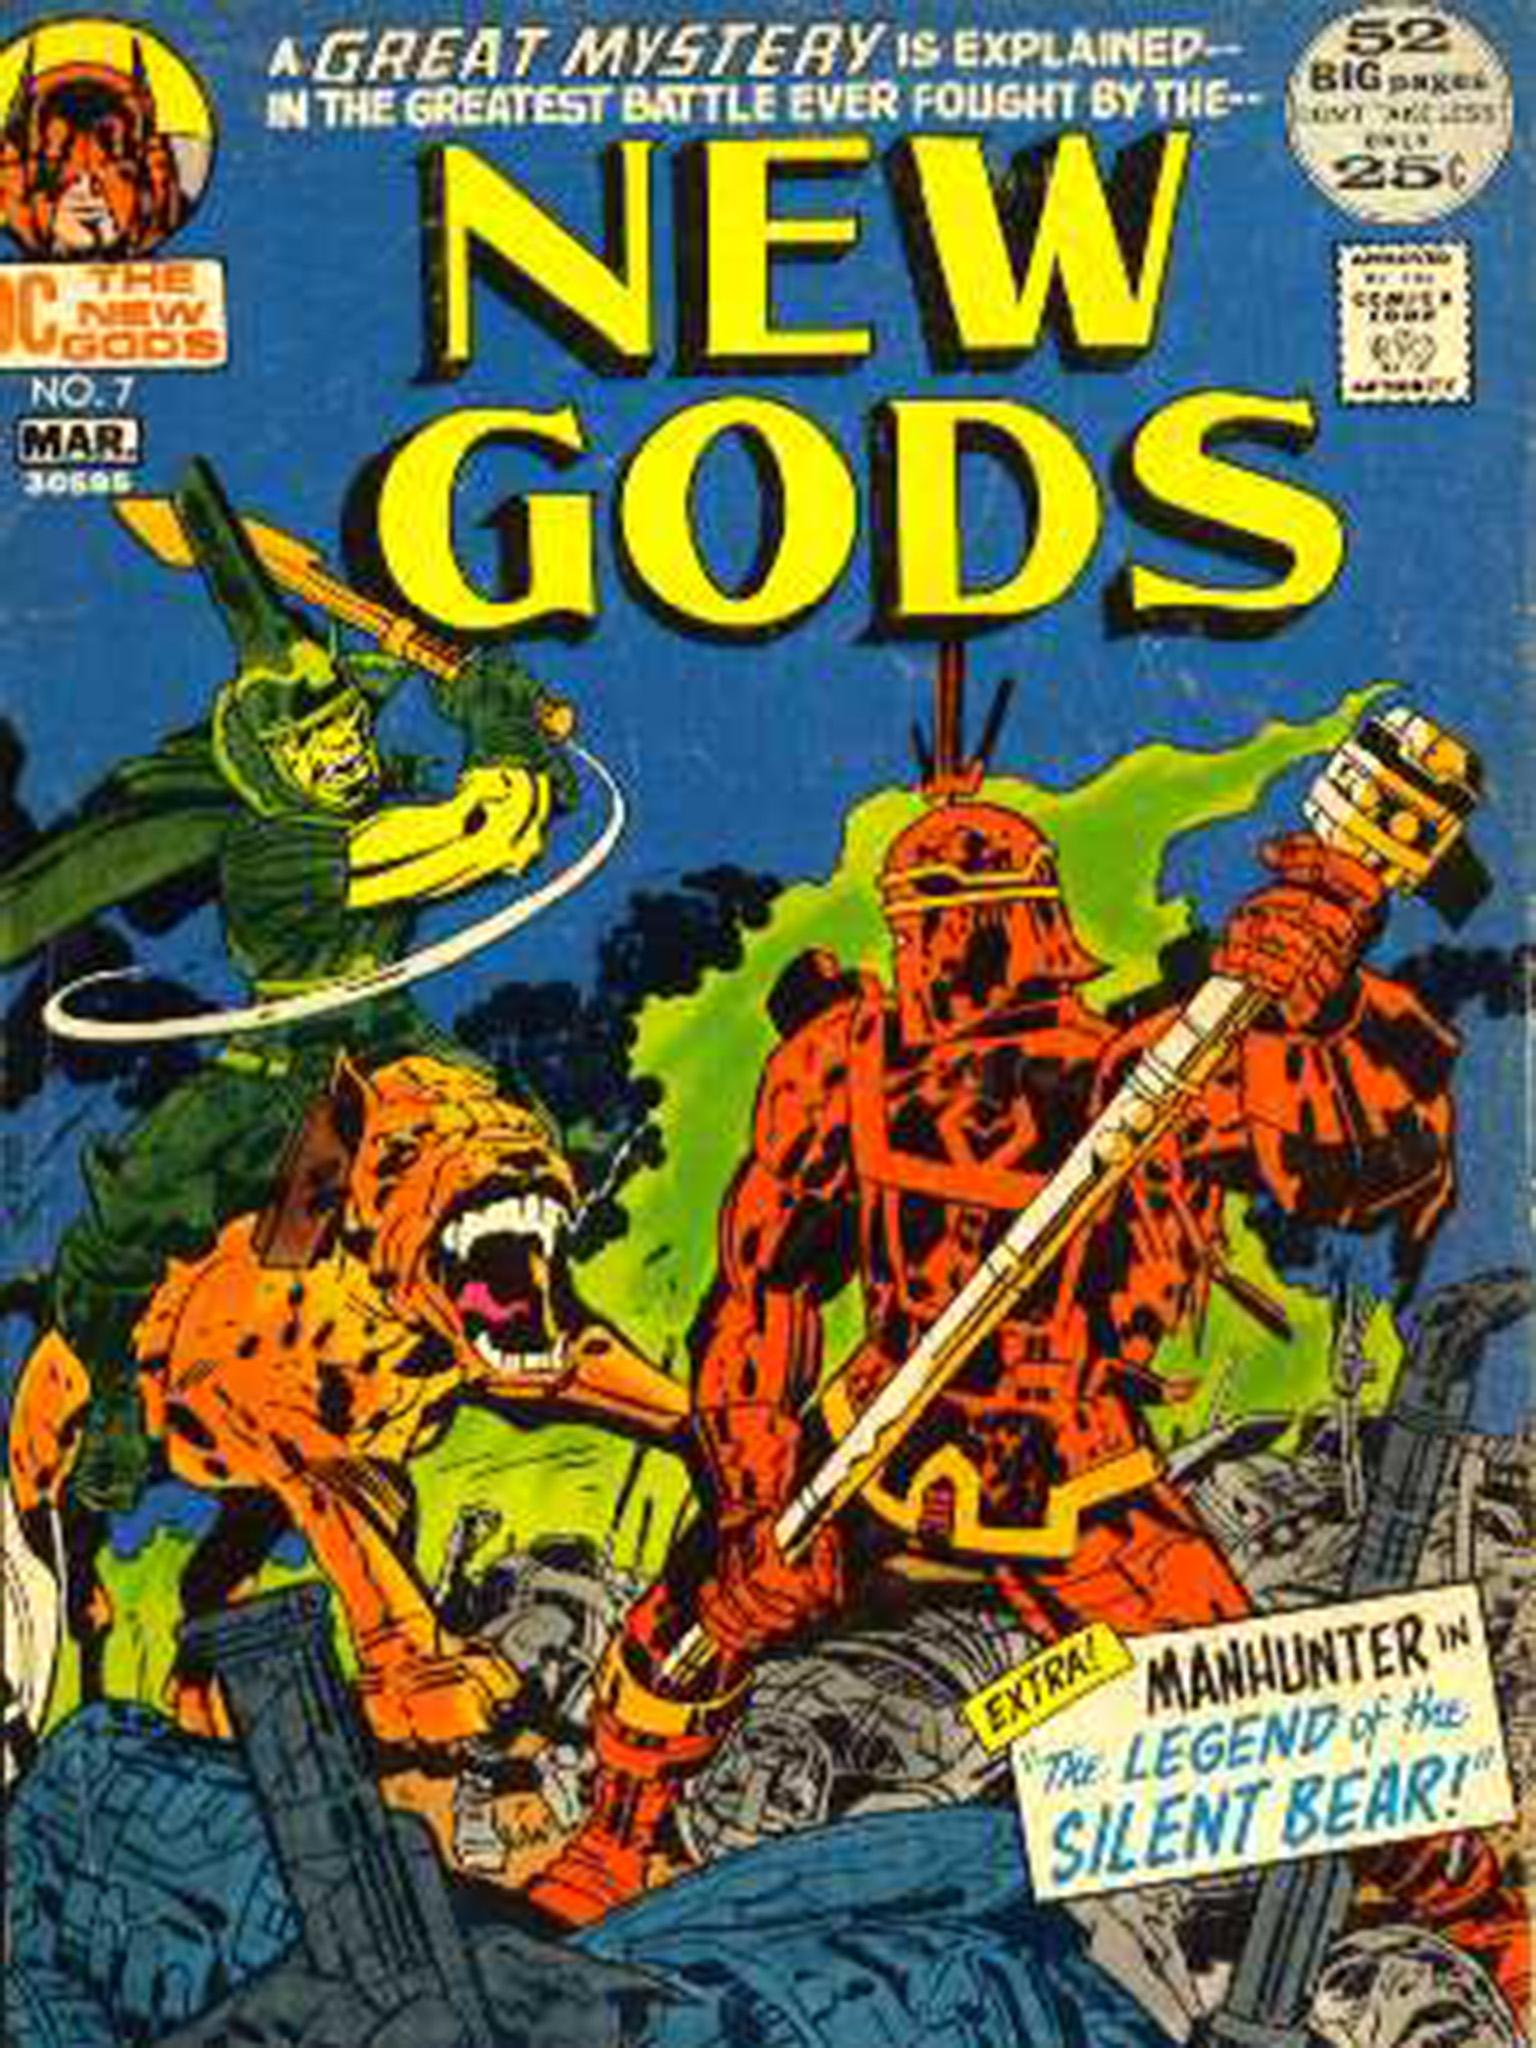 A ‘New Gods’ cover from March 1972, bearing Kirby’s typical bombastic style